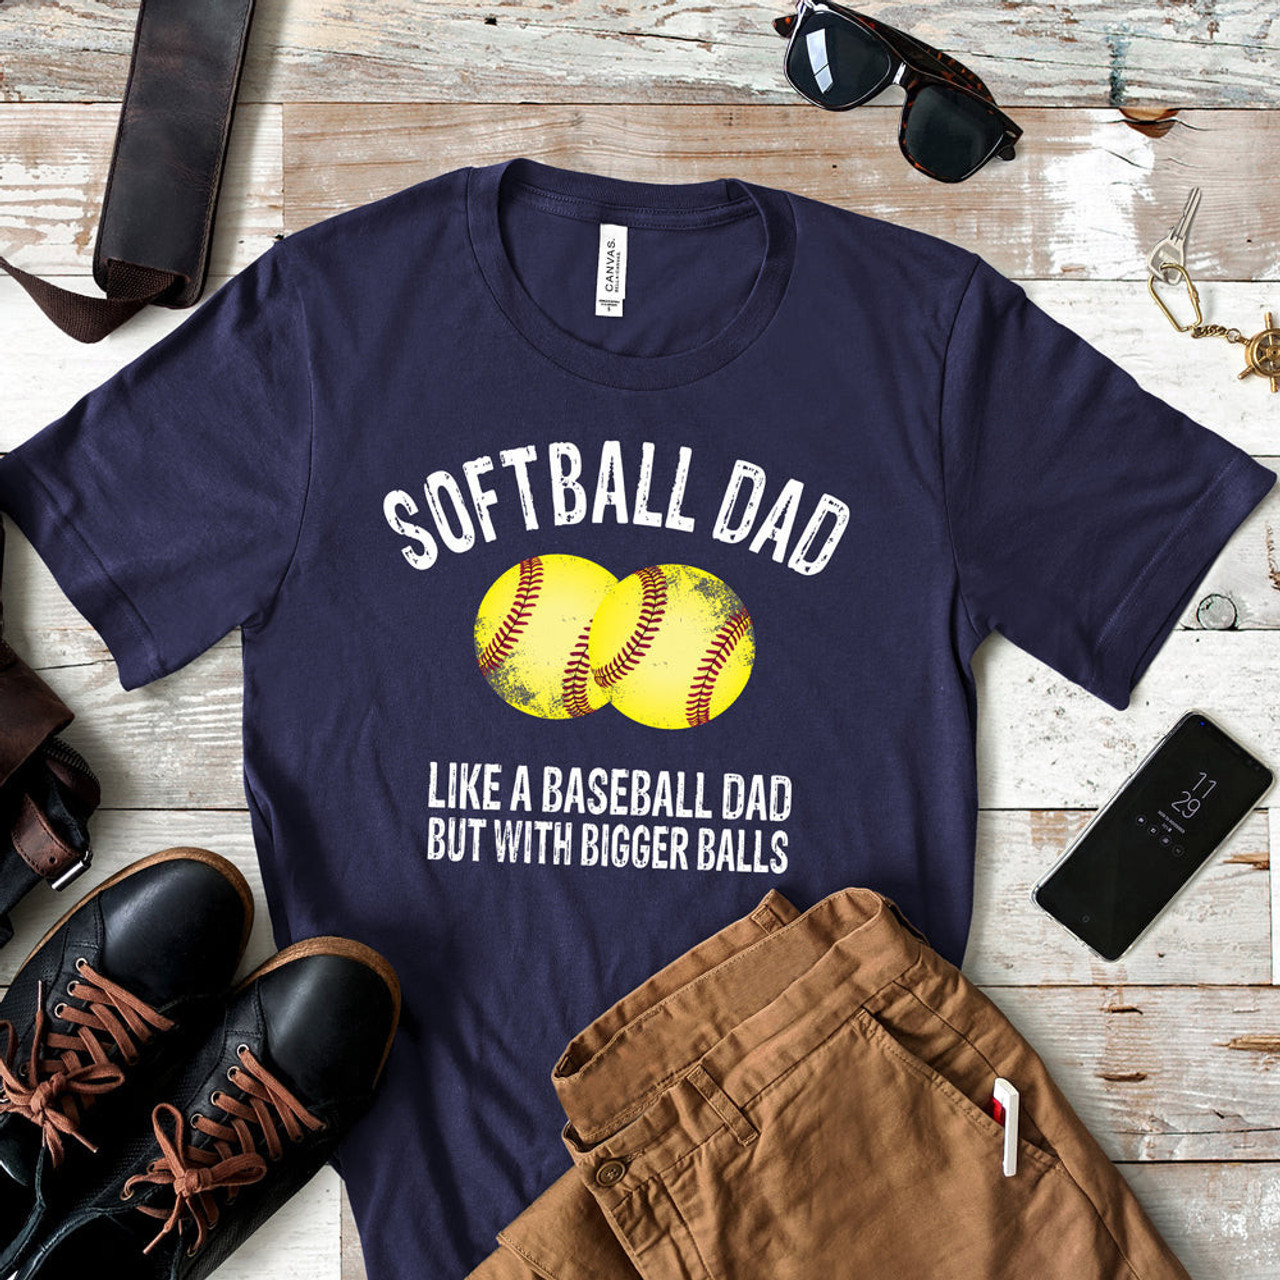 Dad Of Ballers Funny Baseball Softball From Son T Shirt - teejeep